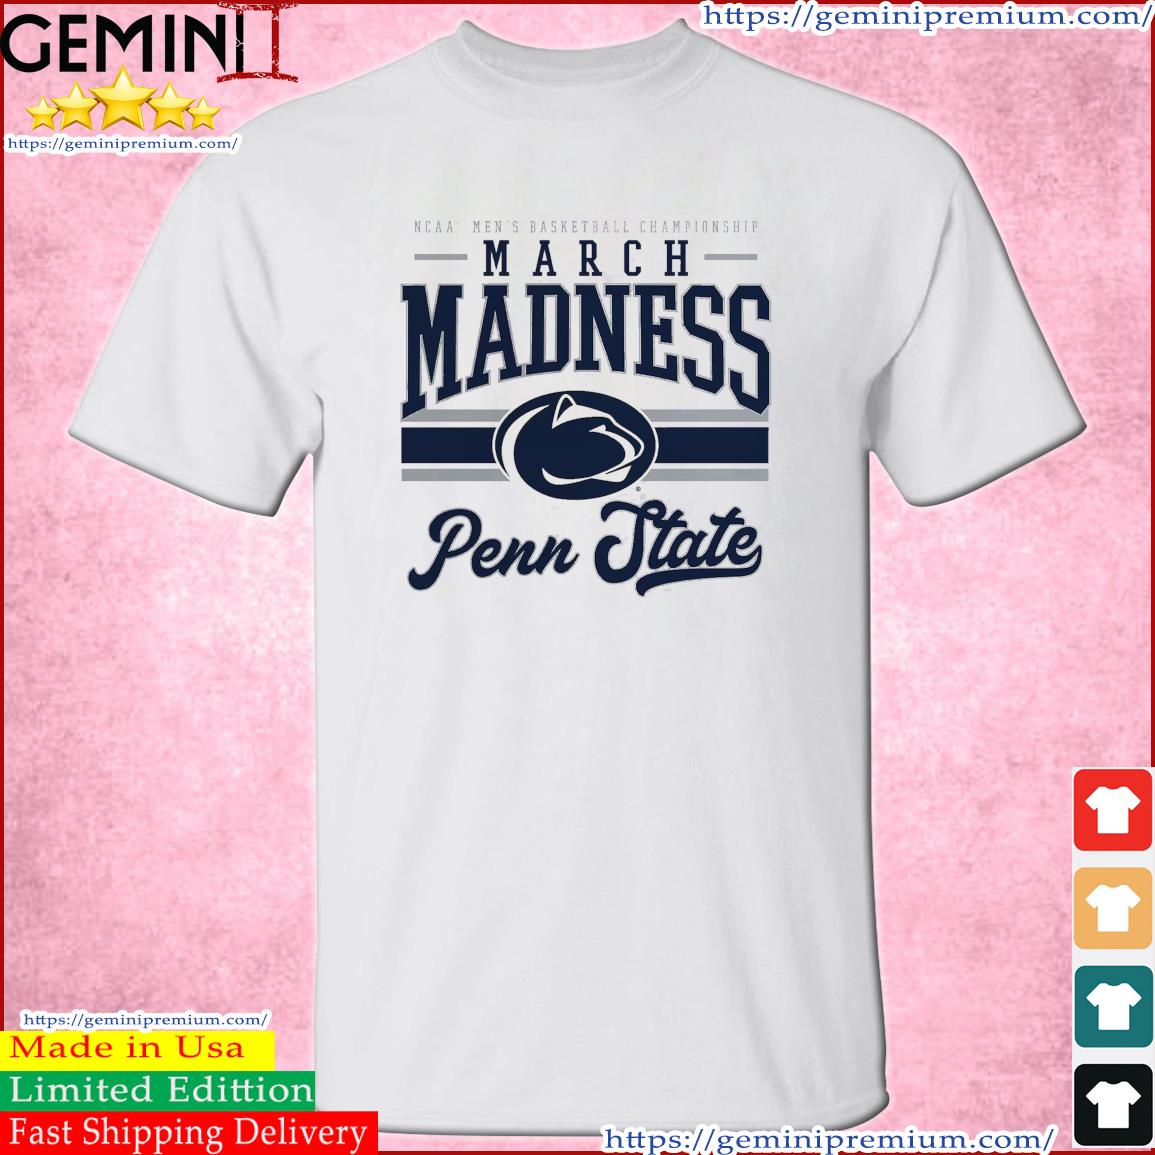 Penn State Nittany Lions NCAA Men's Basketball Tournament March Madness 2023 Shirt